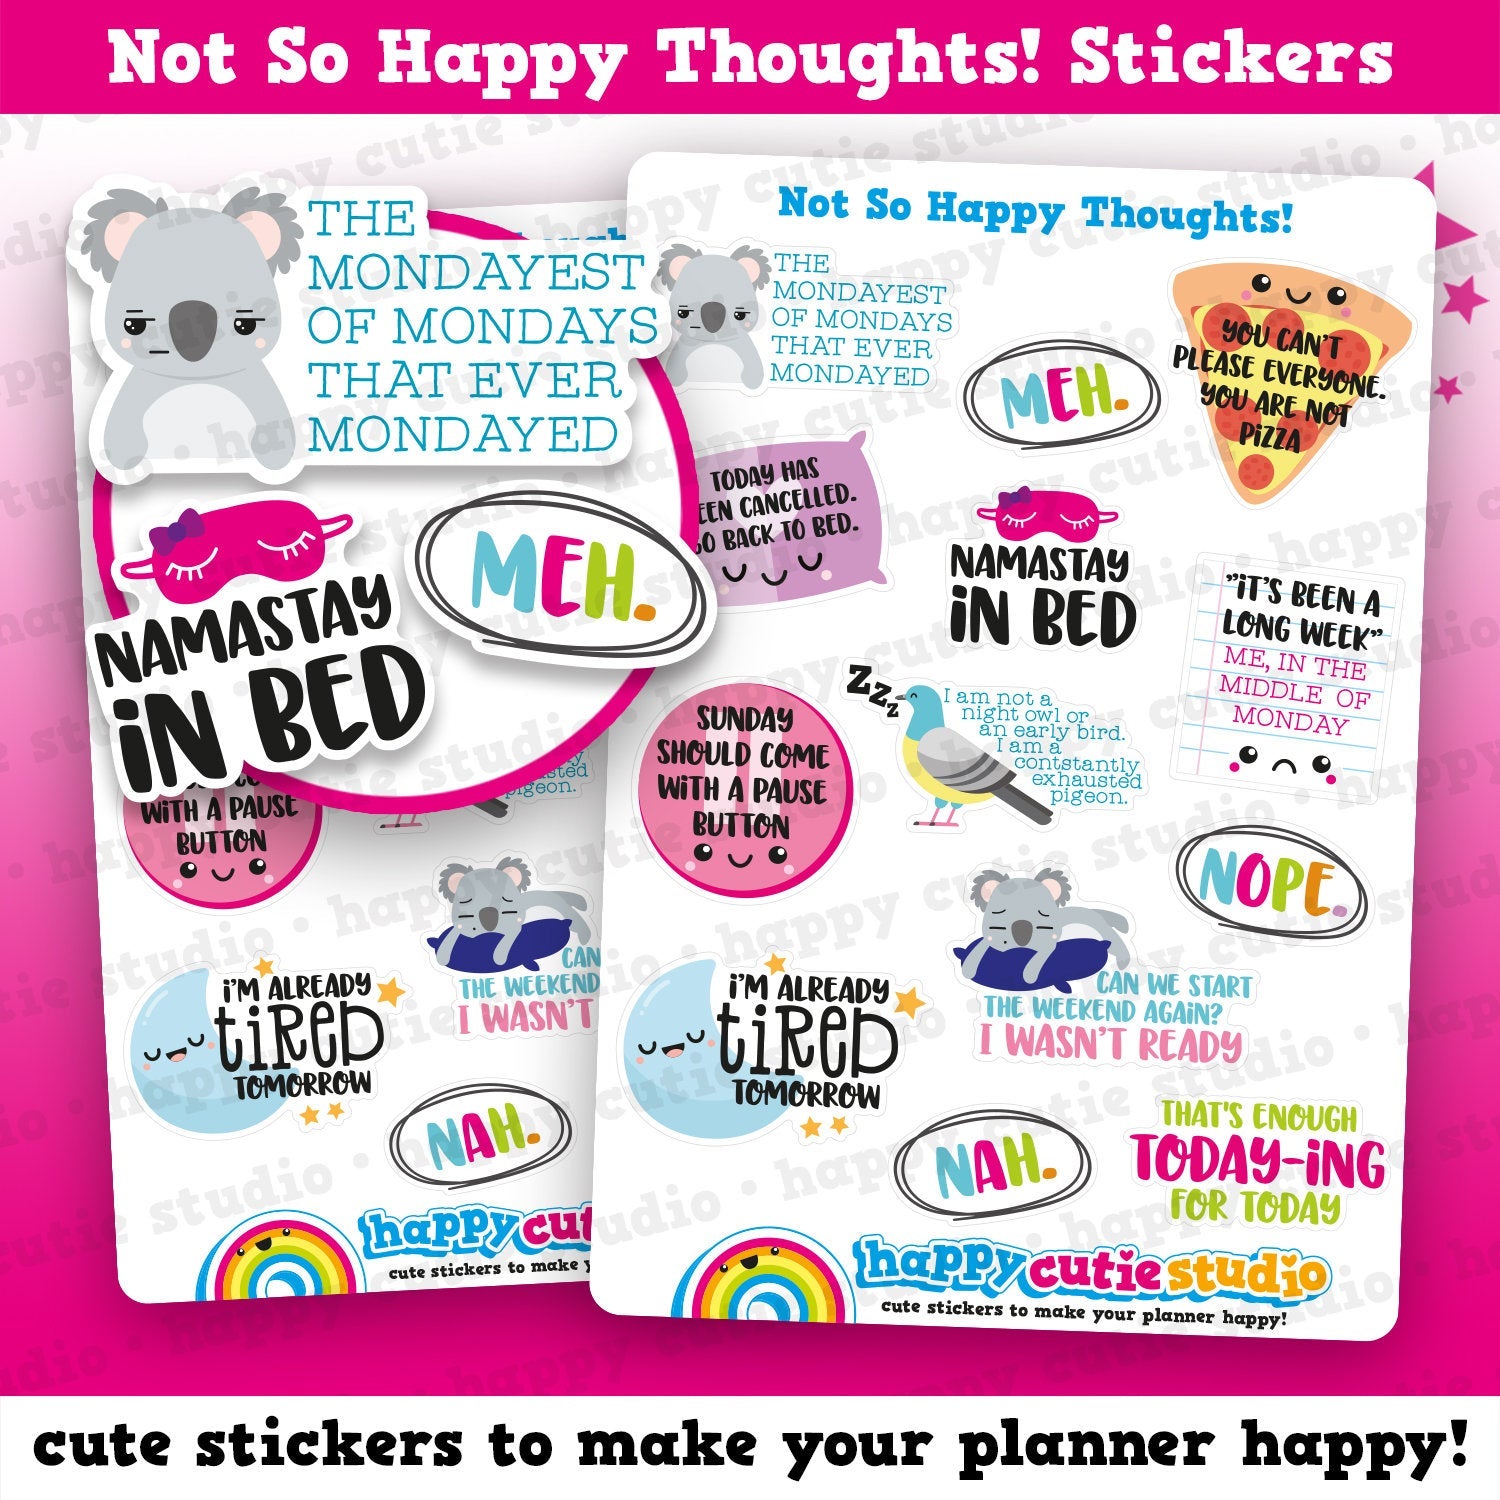 14 Cute Un-Motivational/Un-Inspirational/Not Happy Thoughts Planner Stickers